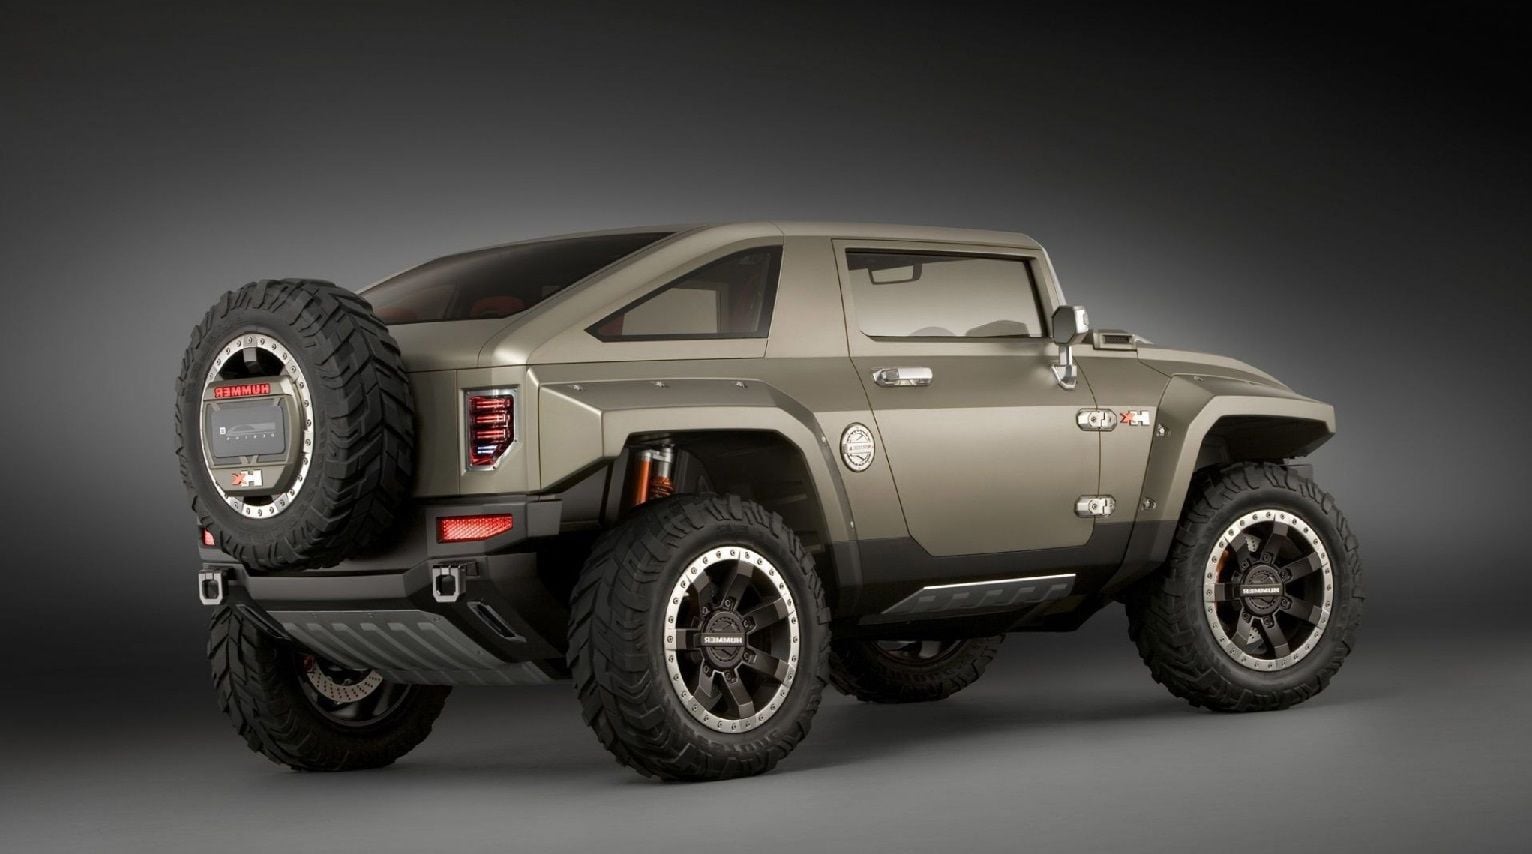 Lower Gas Prices Cause for GM to Bring Back the Hummer? - CarsDirect